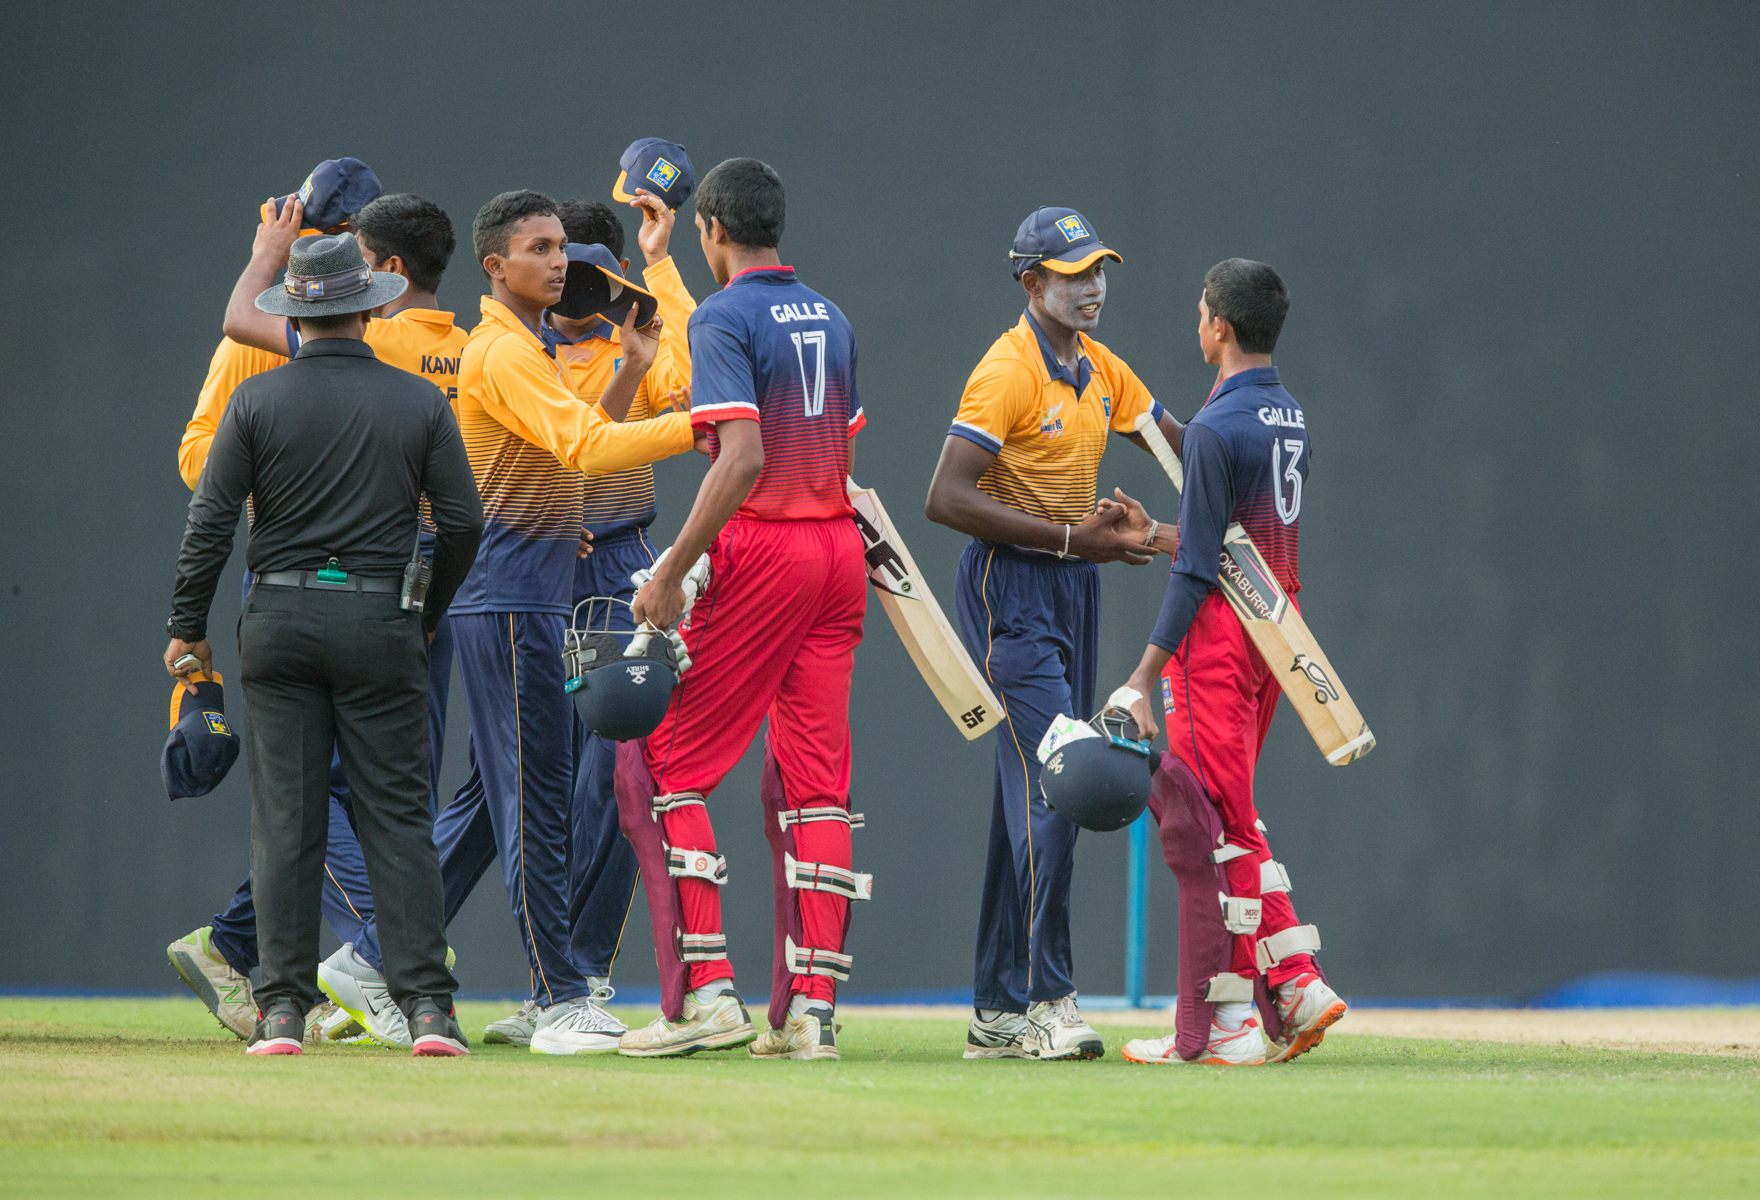 Under 19: Colombo trounce Dambulla by 147, Kandy beat Galle by 33